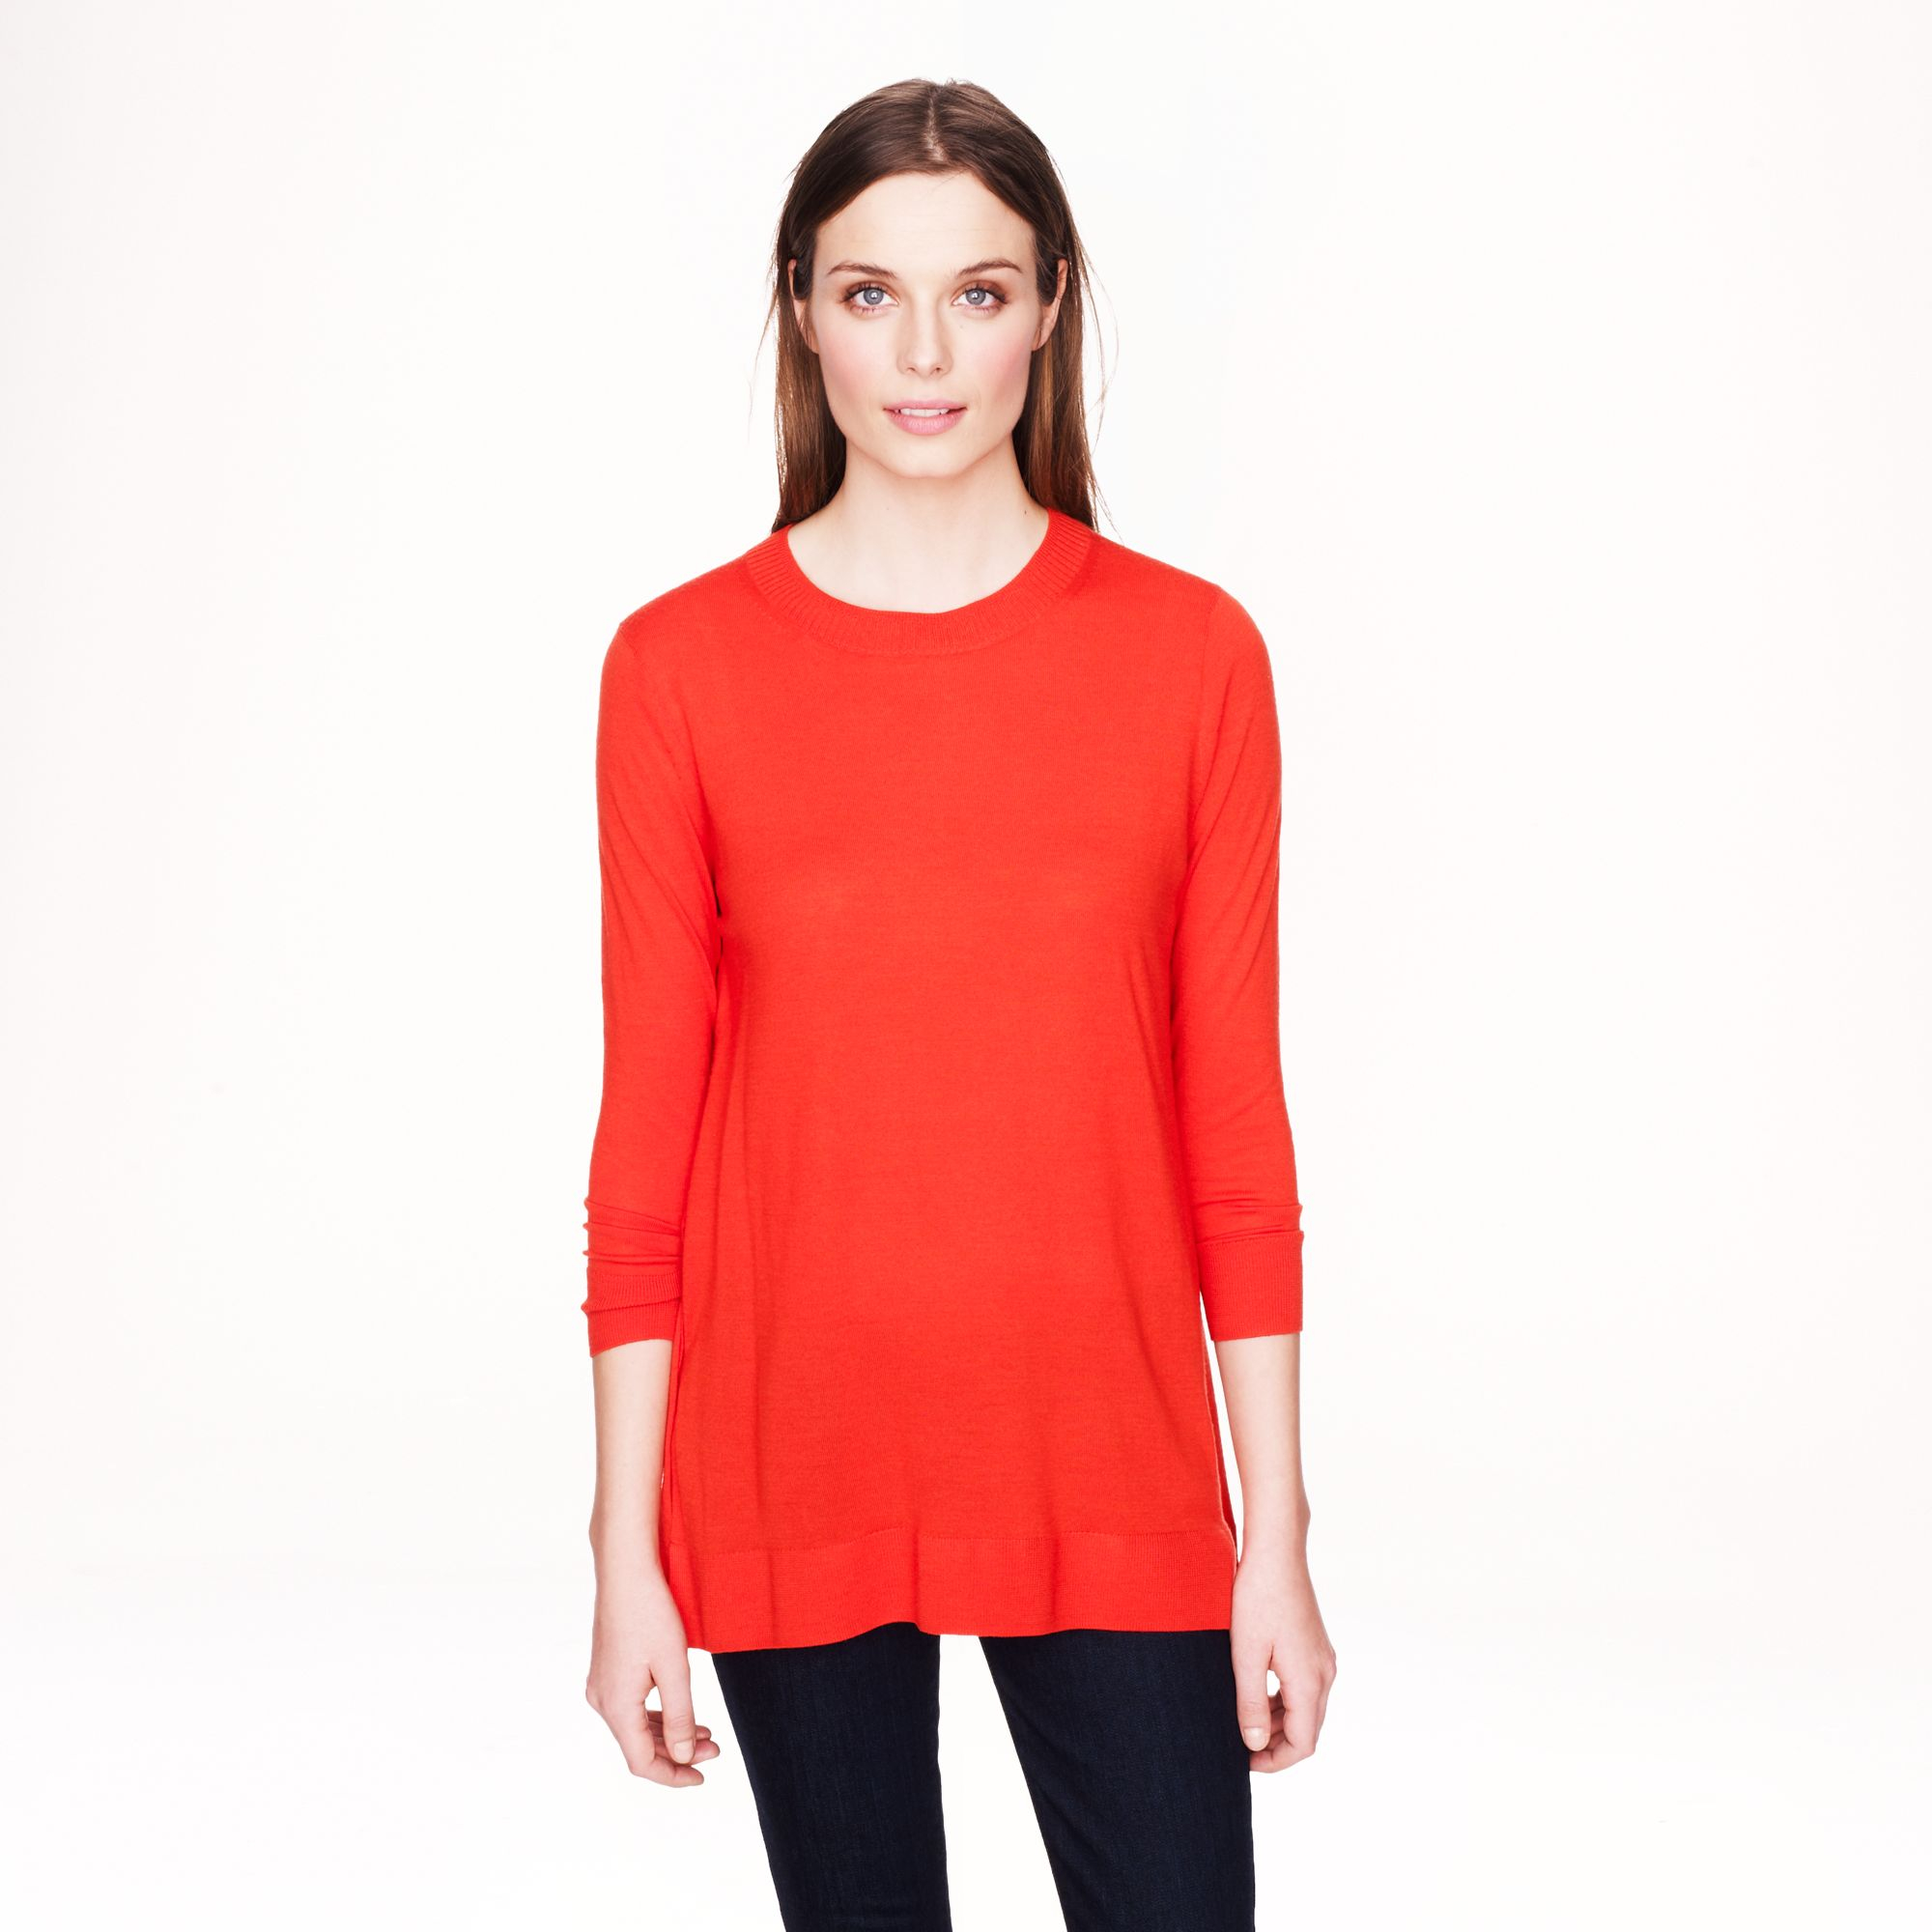 J Crew Factory Lightweight Tunic Sweater Review - Cardigan With ...